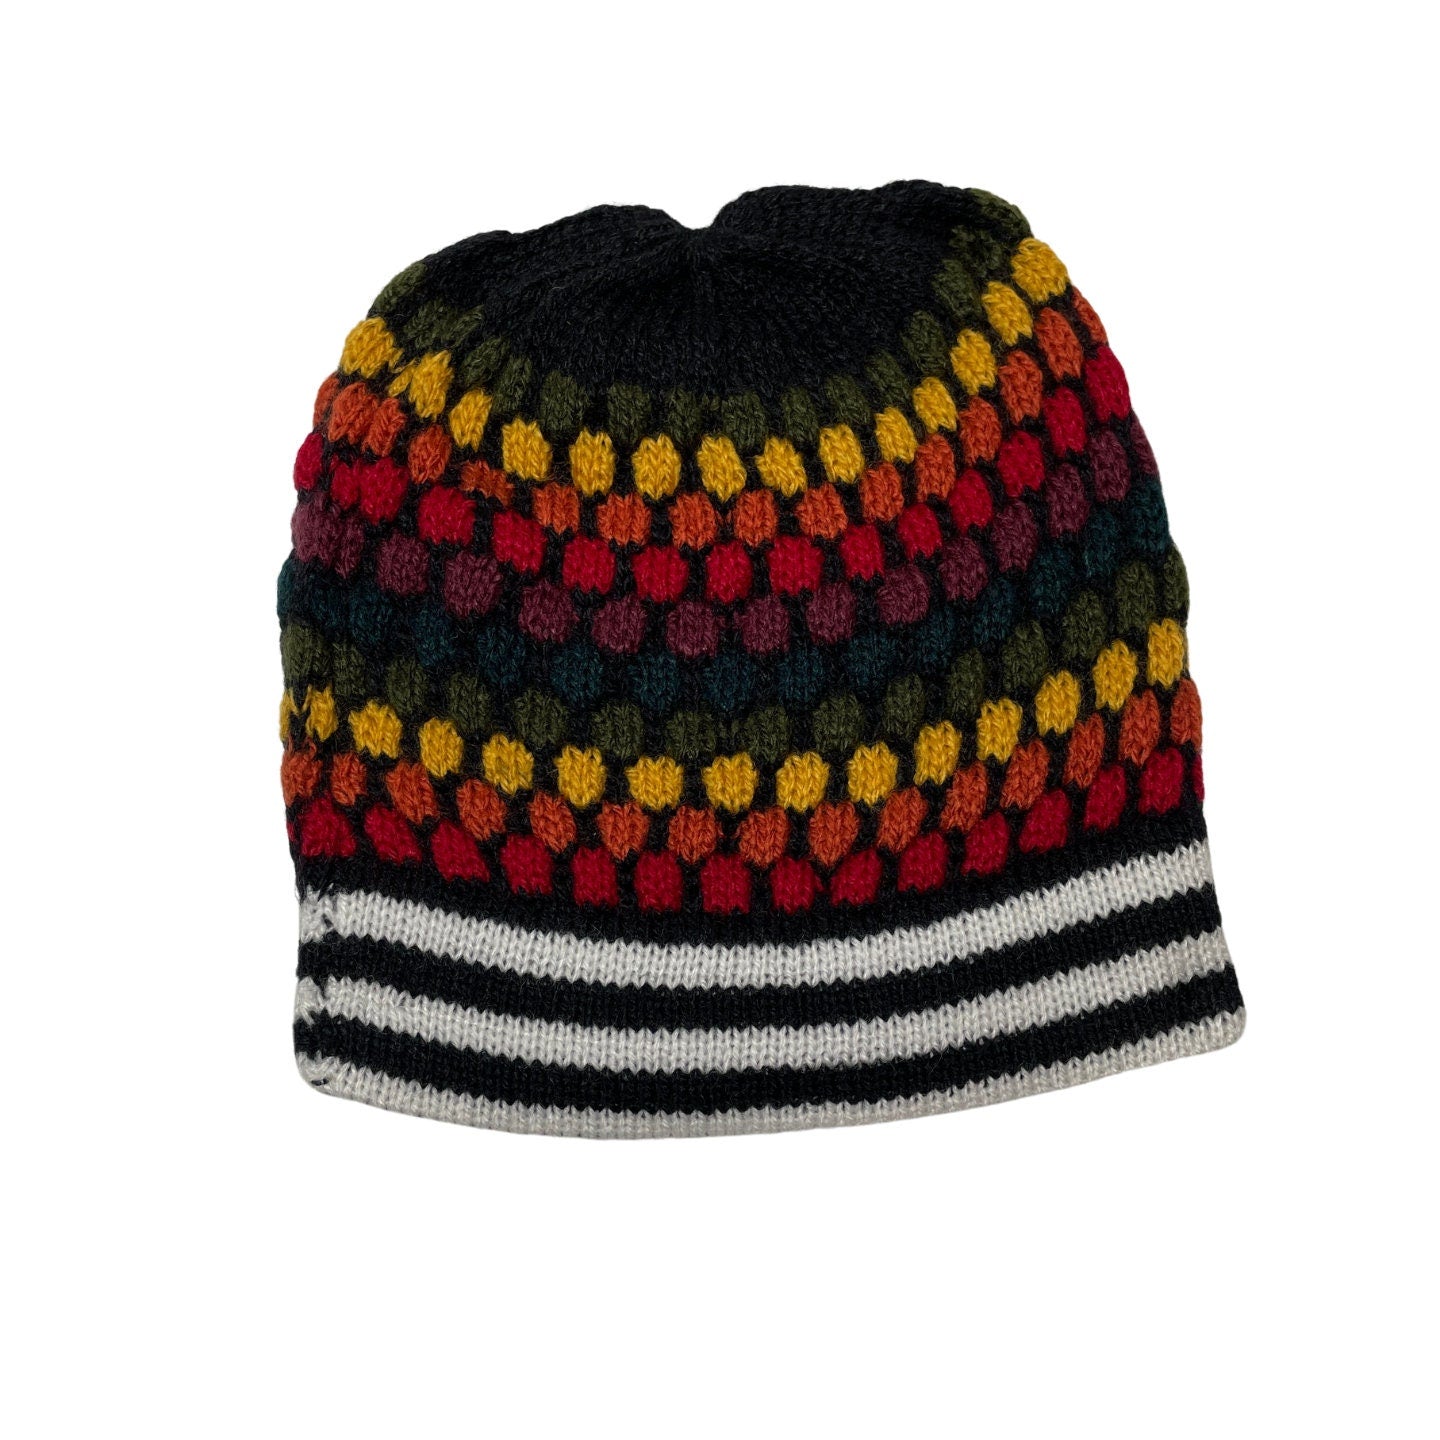 Colorful Knitted Alpaca Beanie Hat One Size